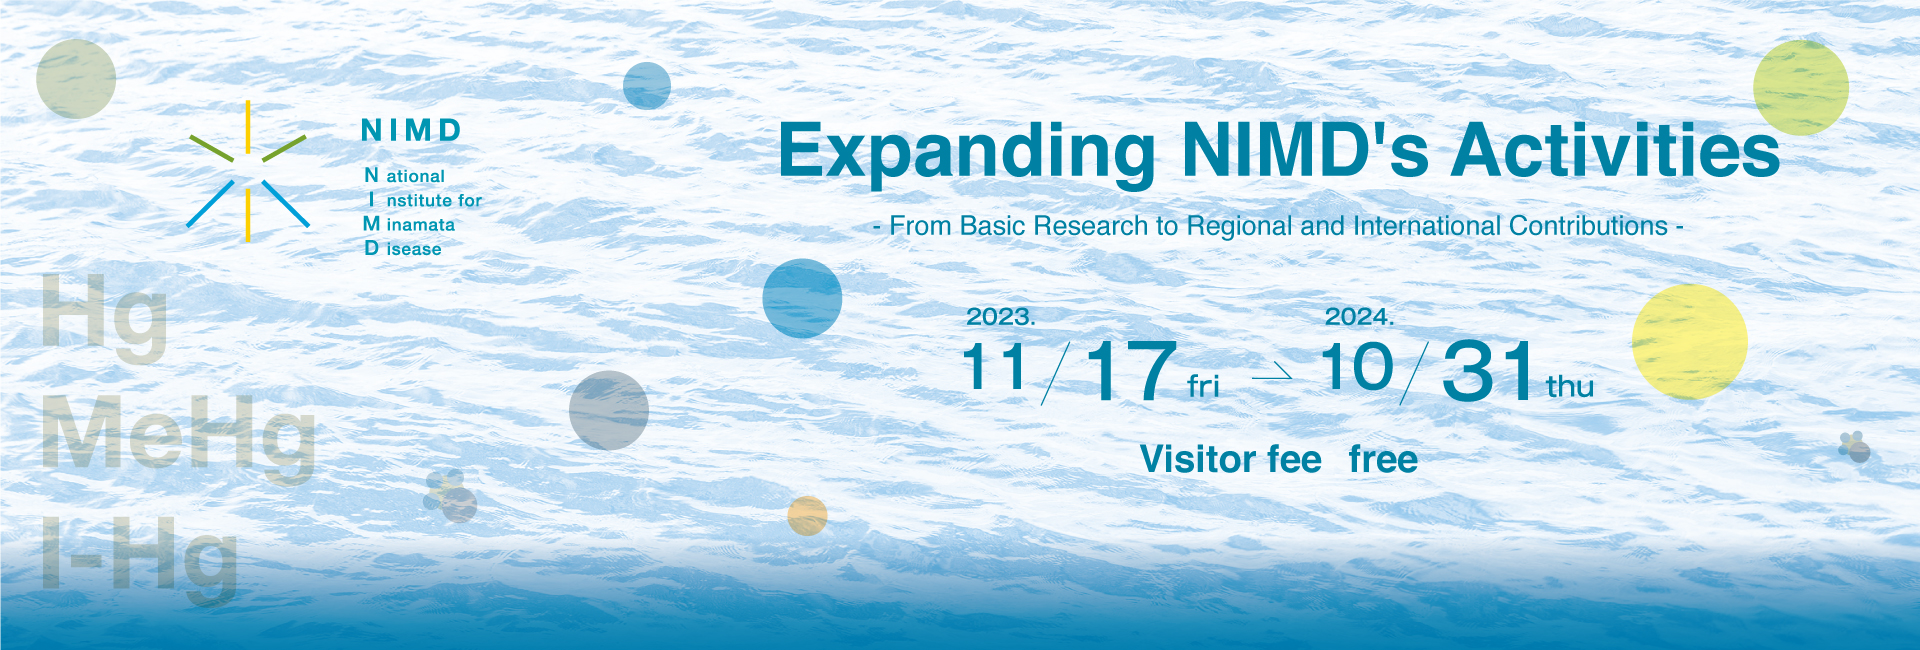 NIMD's Regional and International Contribution As the World's Research Institute for Minamata Disease and Mercury Visitor fee free 2022 11/9 wed 2023 10/31 tue